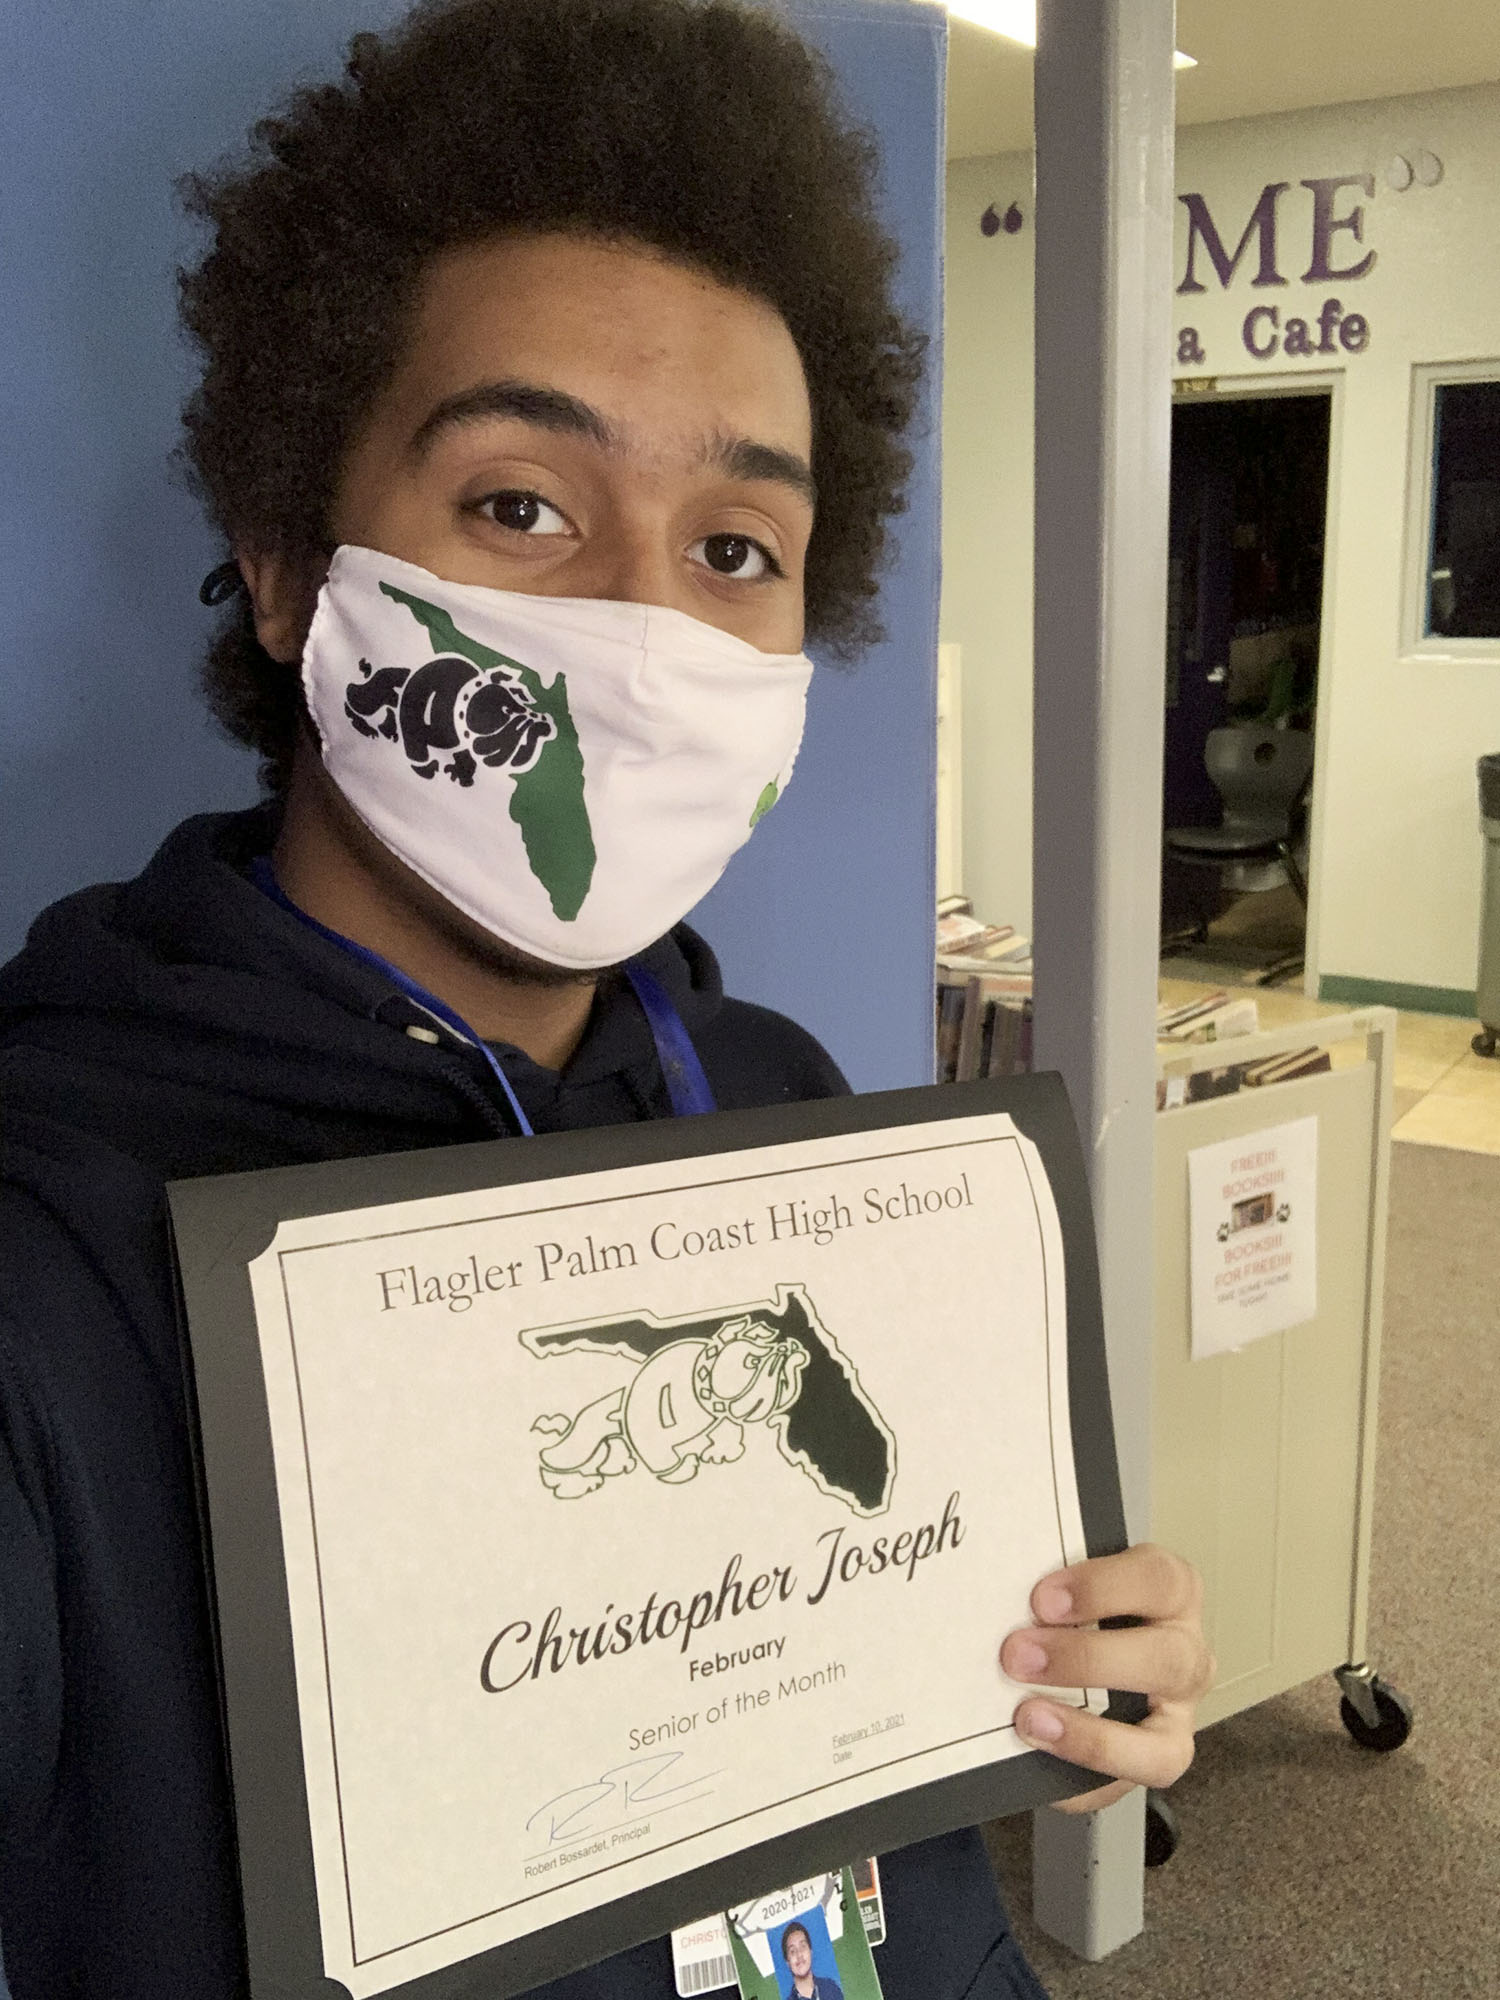 Christopher Joseph holds a Senior of the certificate from Flagler Palm Coast High School